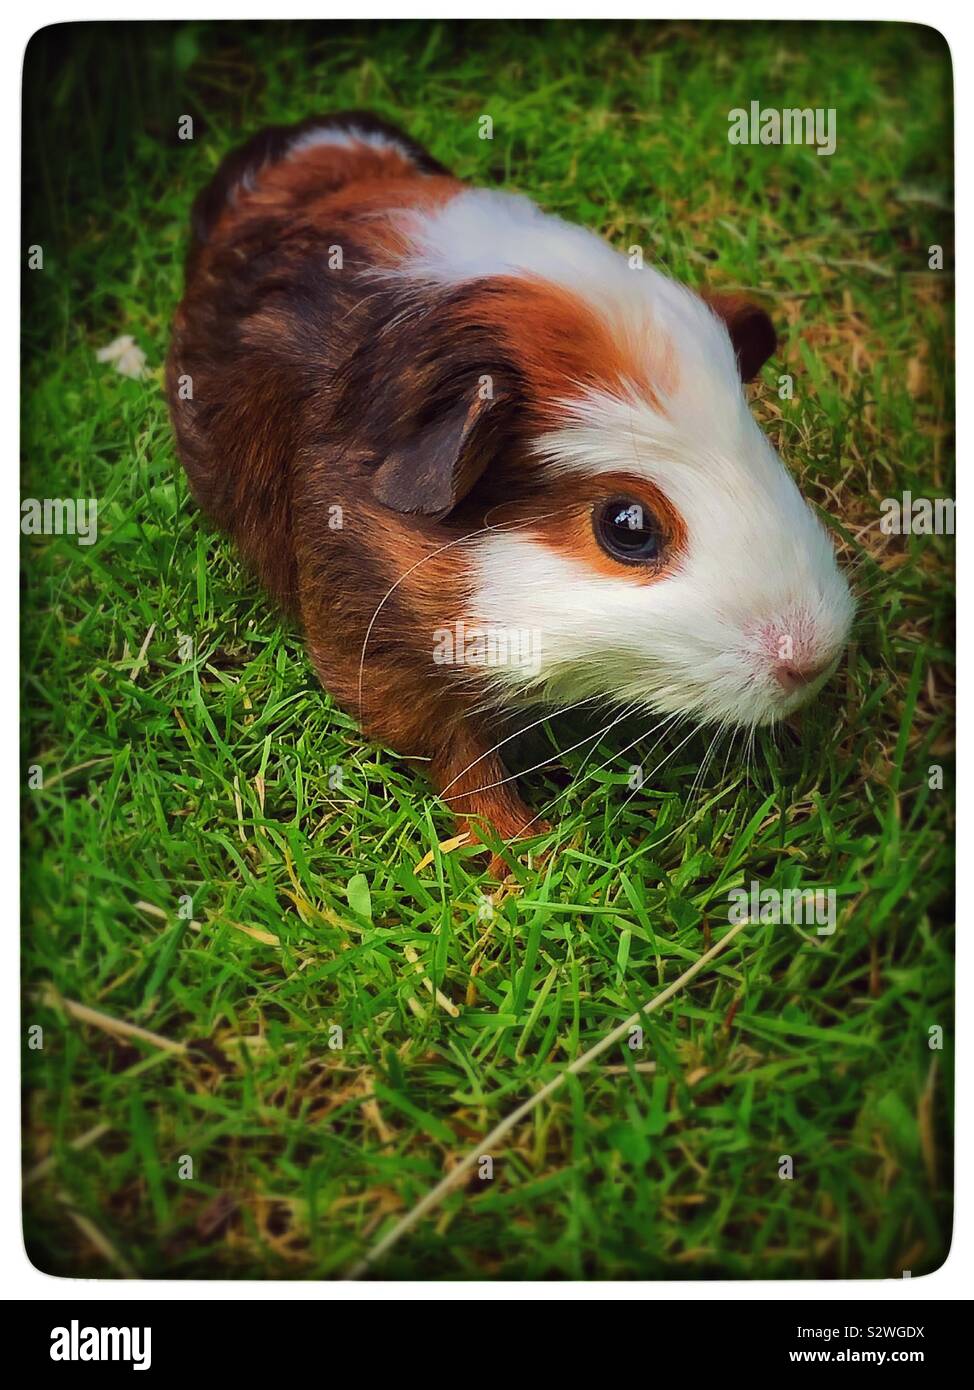 Brown and white guinea pig on grass Stock Photo